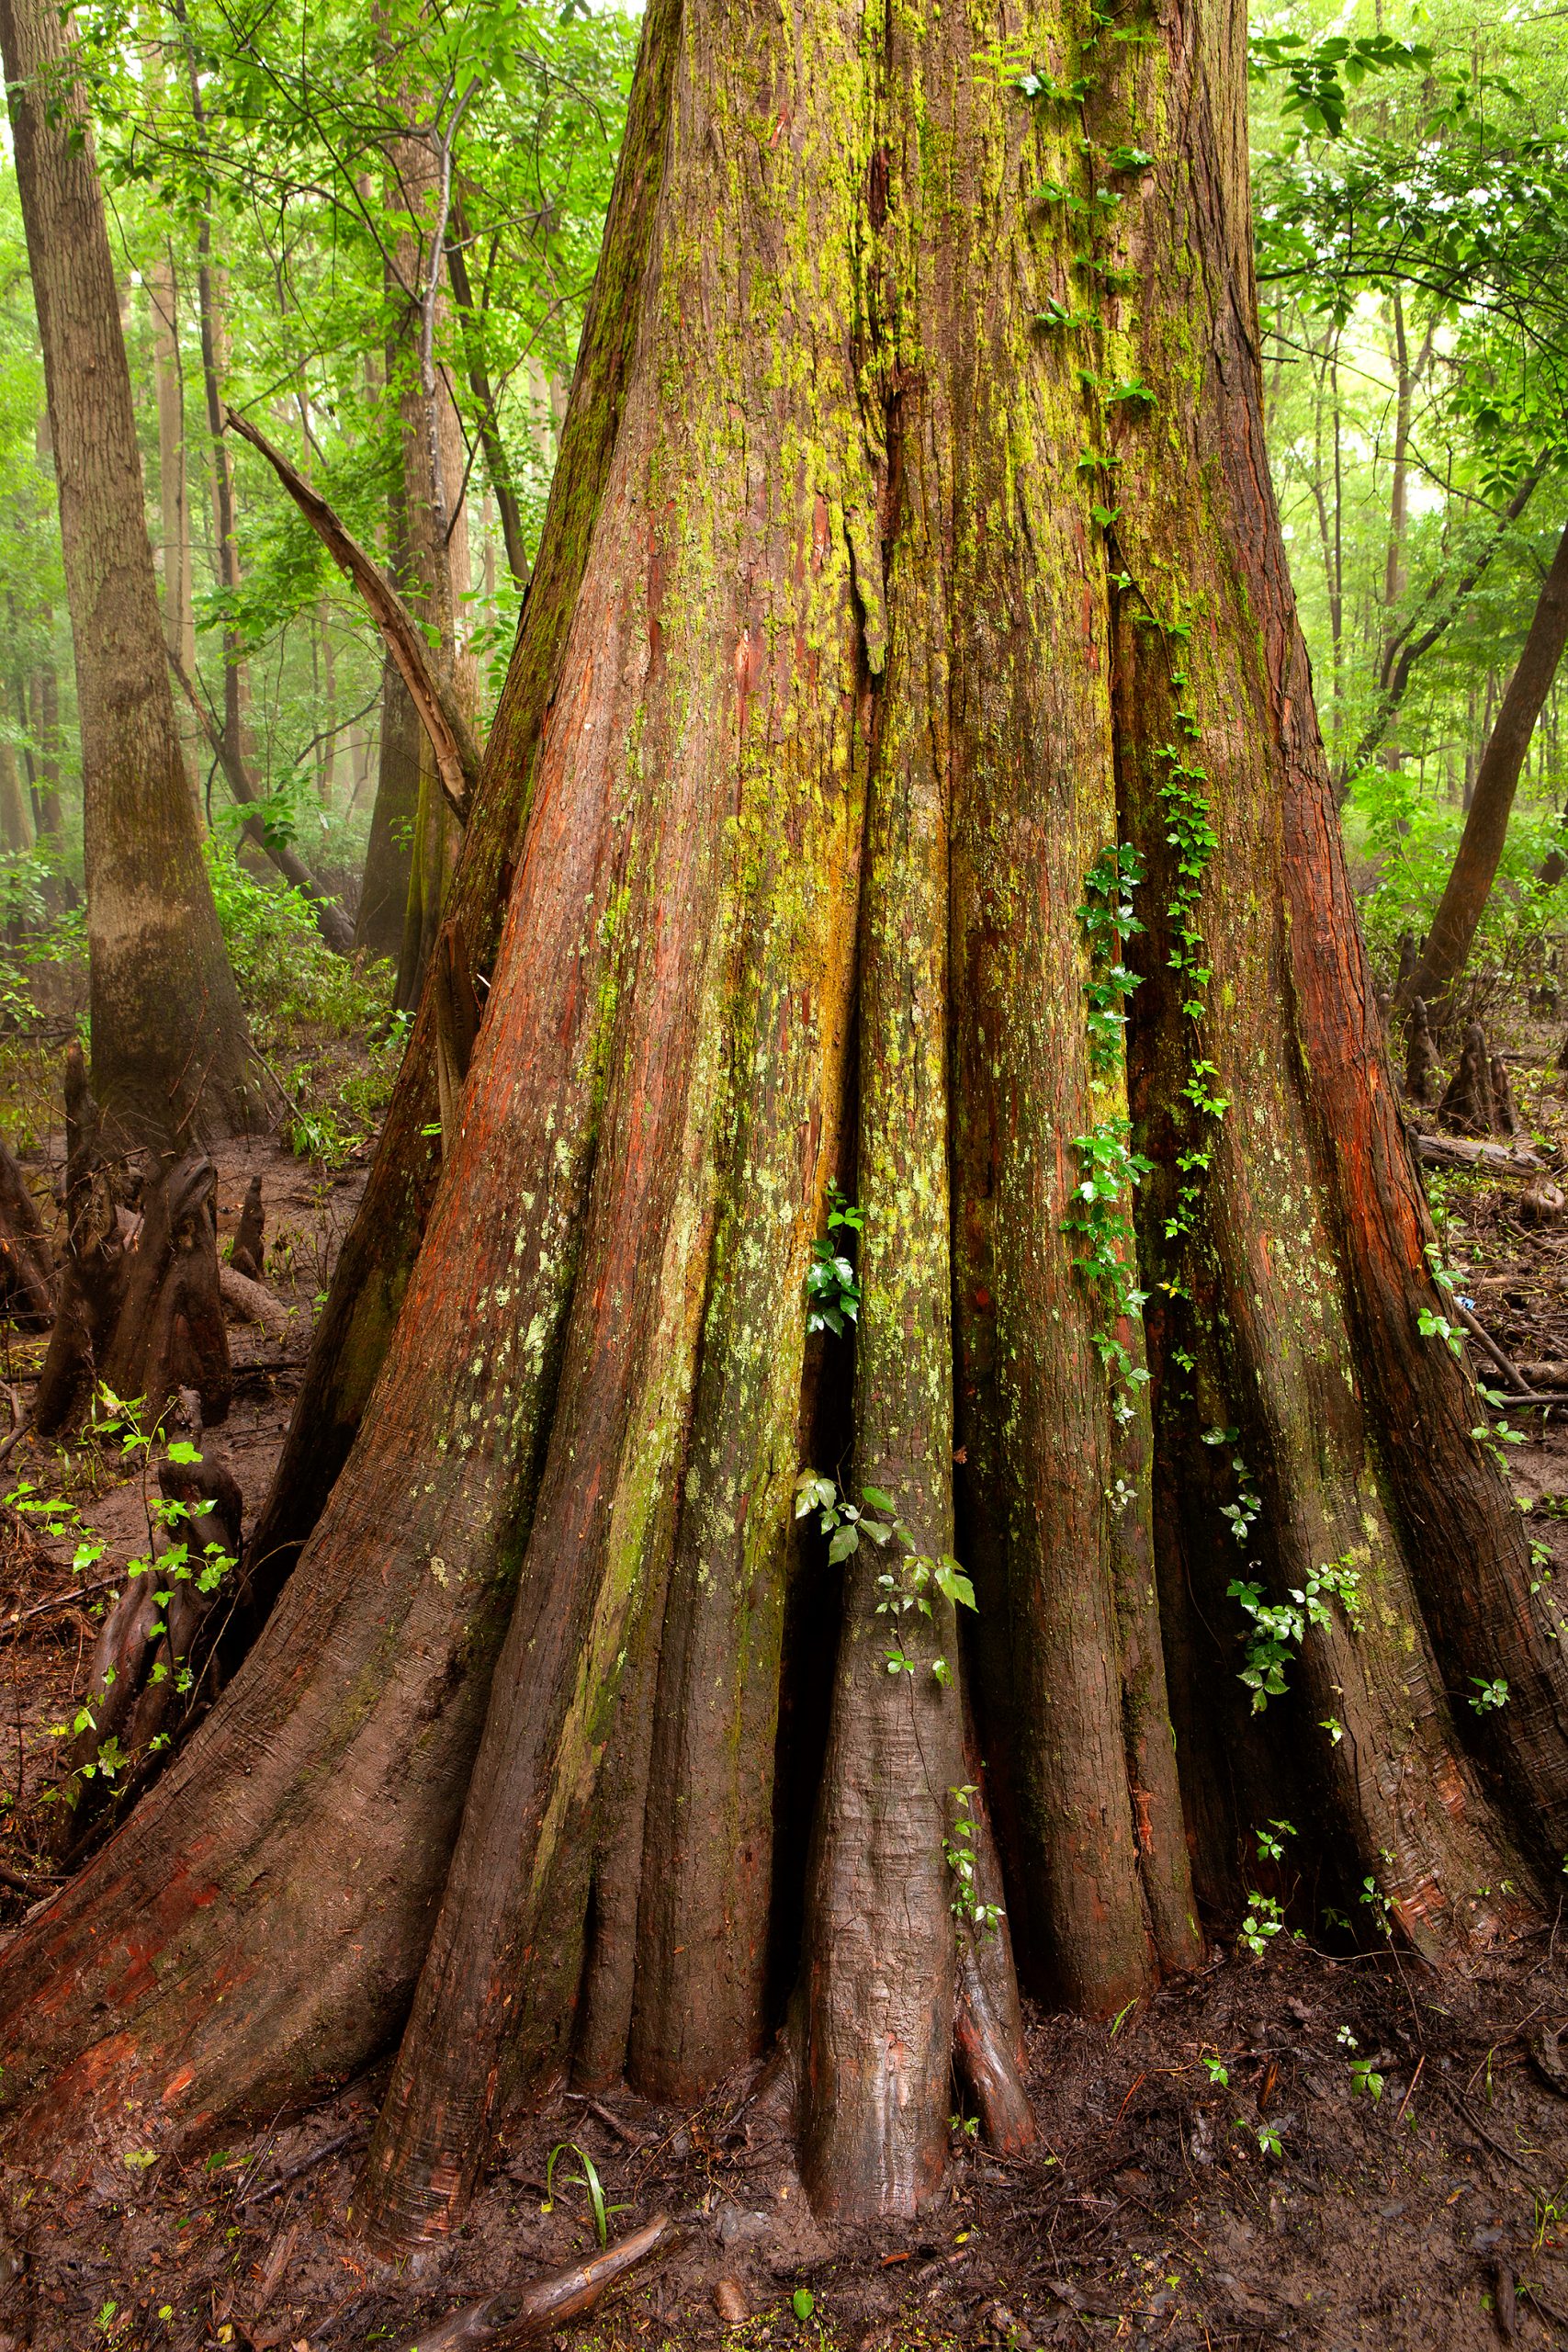 Protected by the visions of conservationists, towering bald cypress and numerous champion state trees in Congaree National Park allow visitors to experience the magnitude of nature’s unlimited potential.